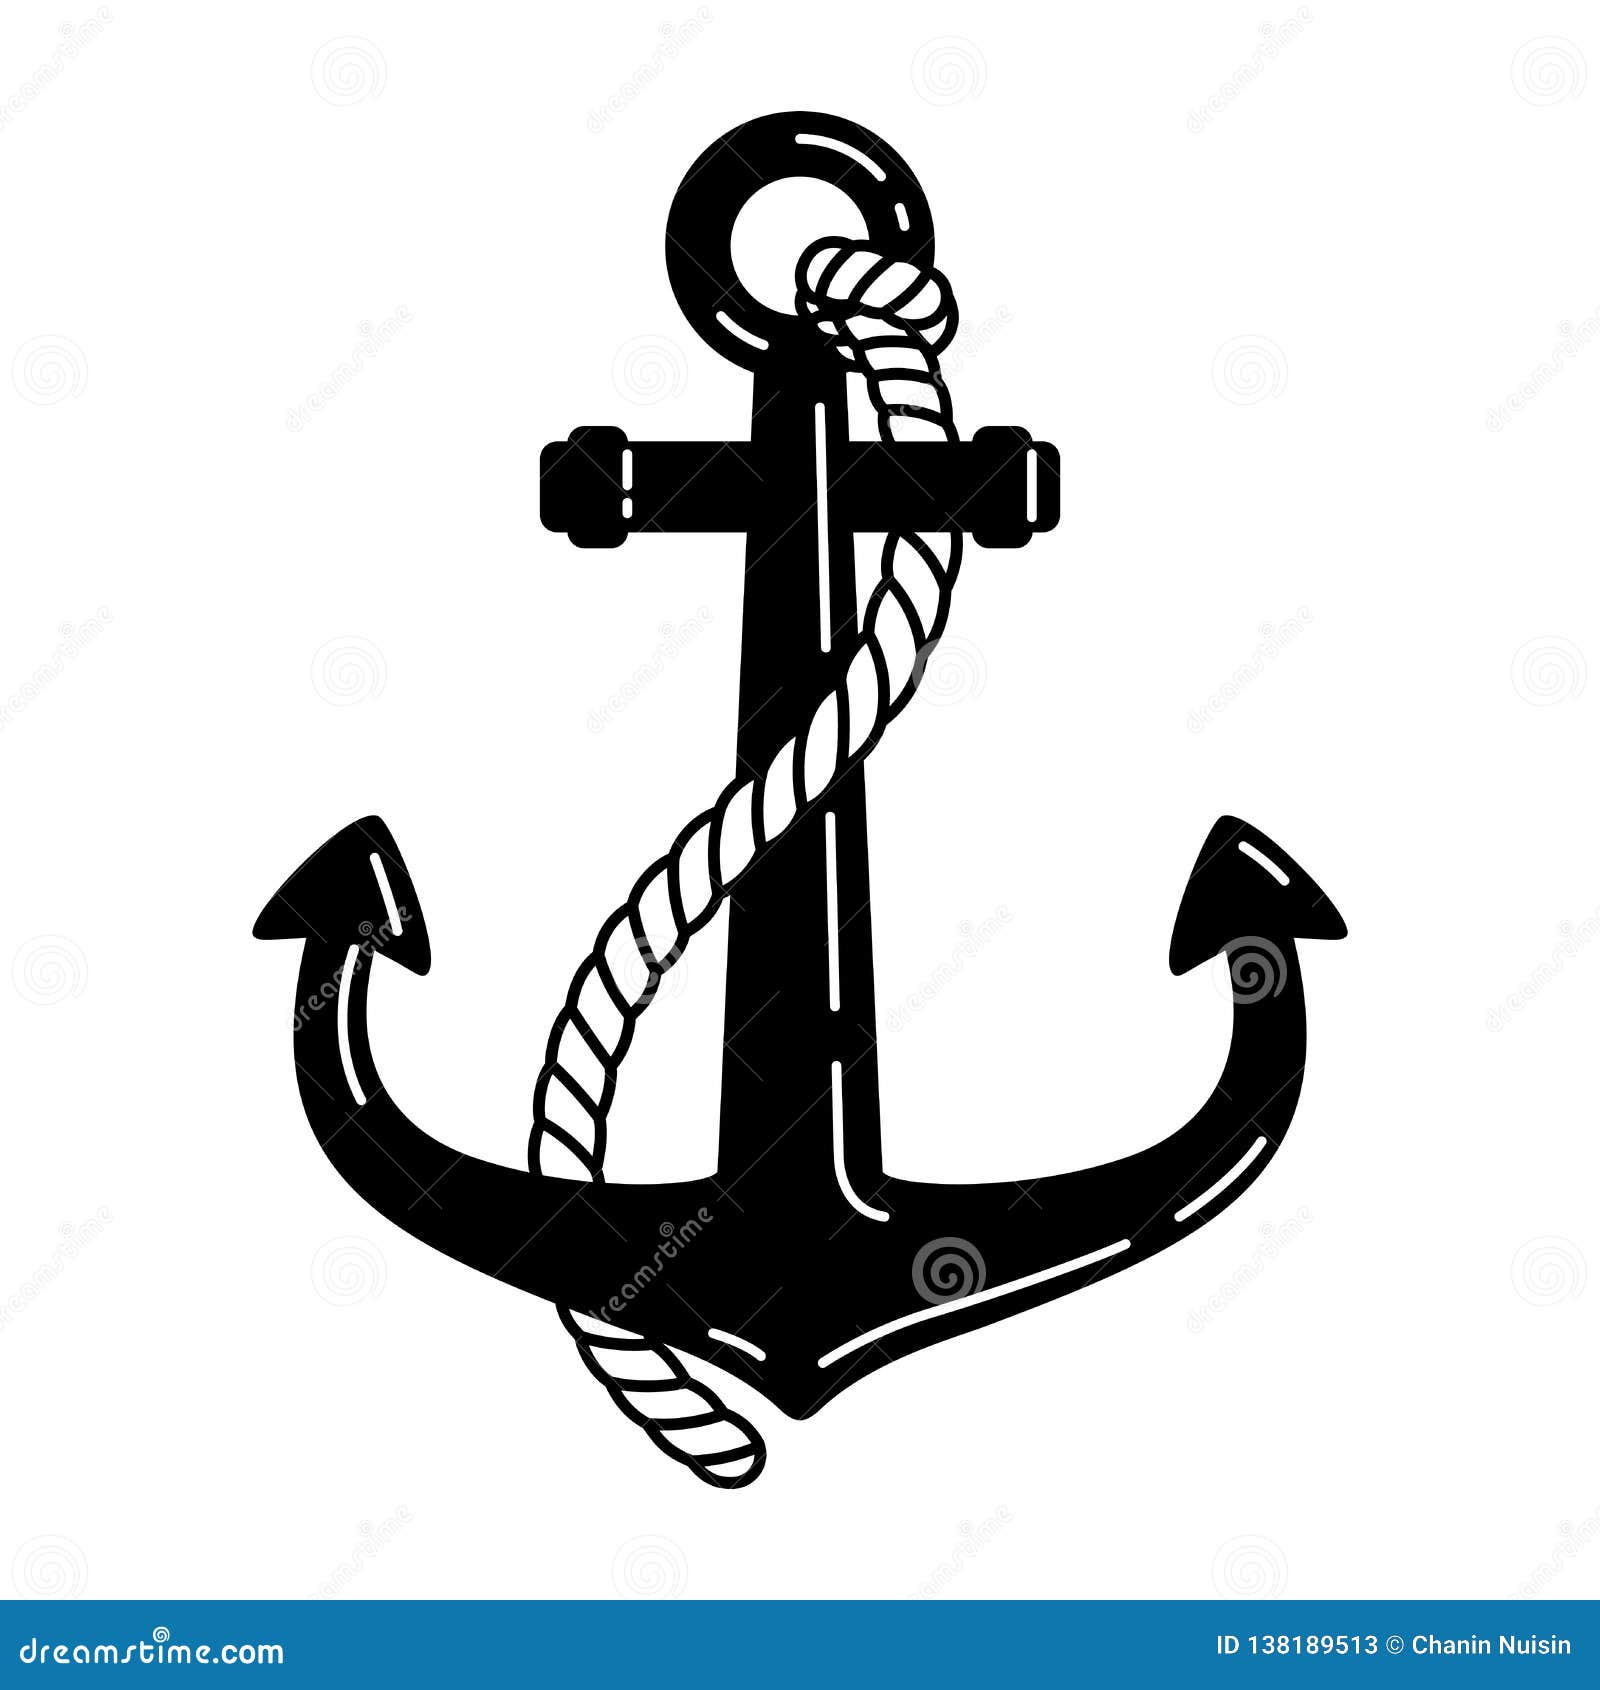 Anchor Vector Icon Logo Rope Boat Pirate Helm Maritime Nautical  Illustration Symbol Graphic Stock Vector - Illustration of scarf, surf:  138189513